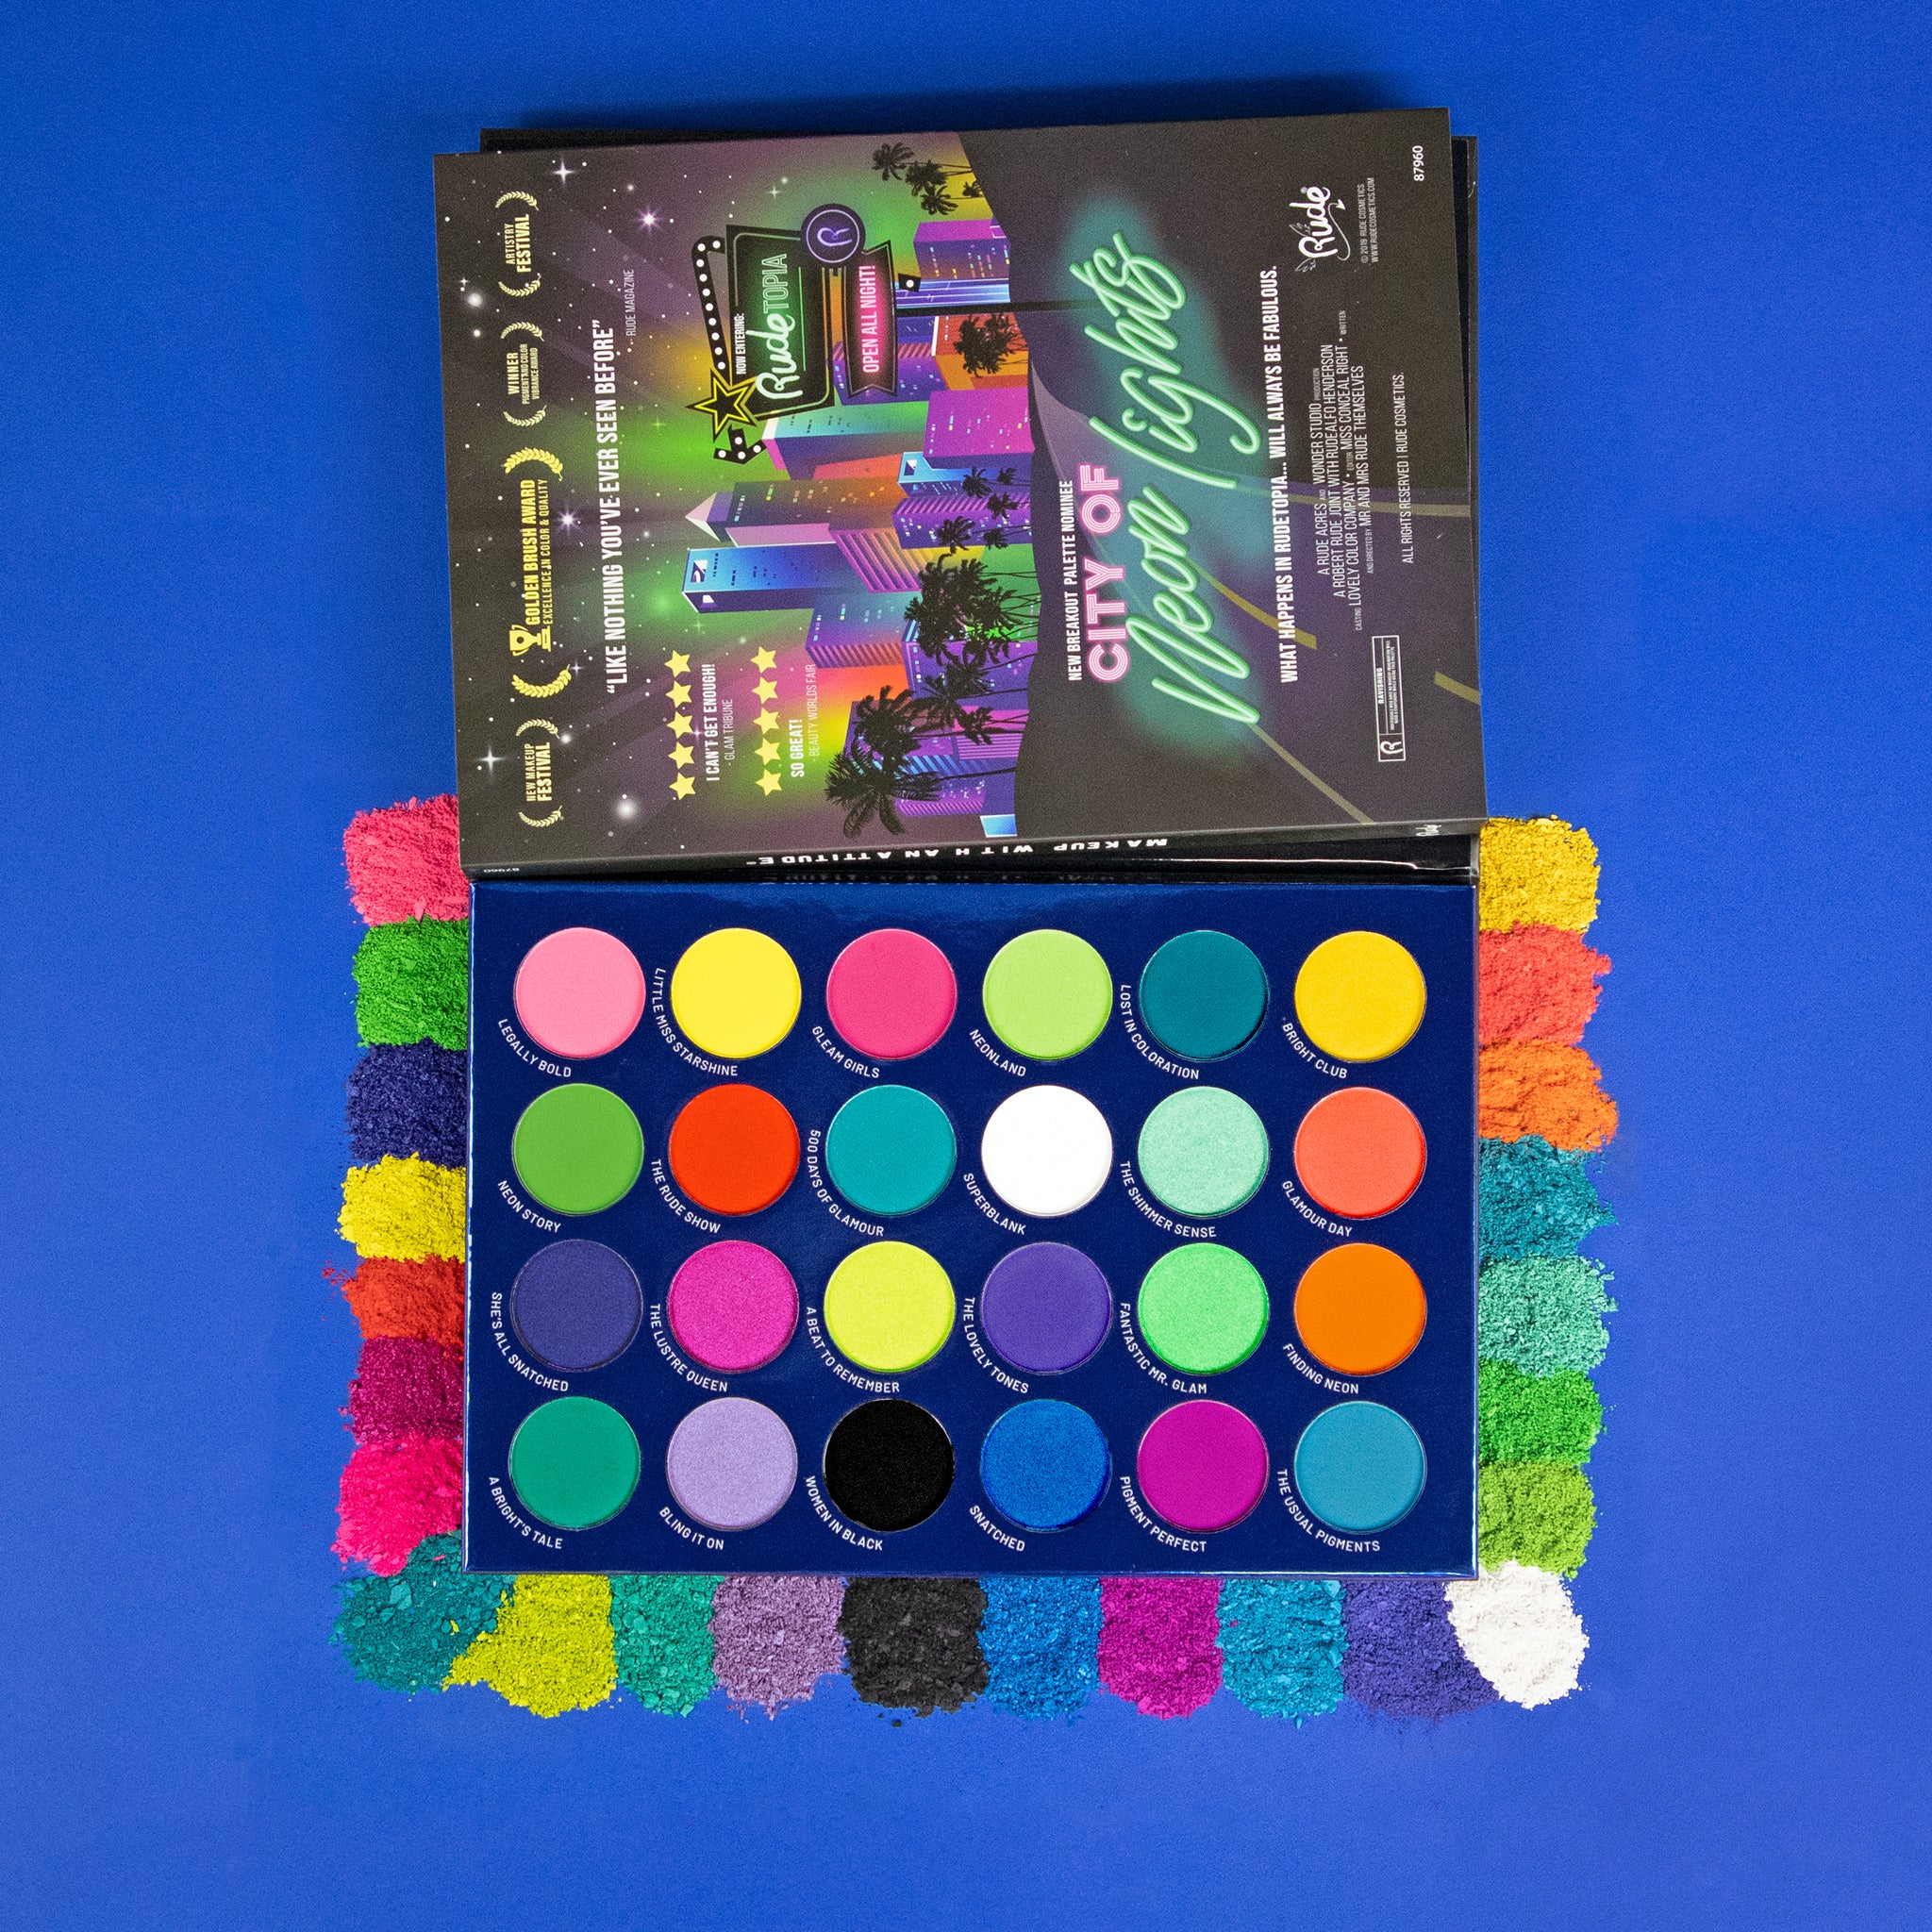 City of Neon Lights Pigments Color Eyeshadow Palette Rude Cosmetics